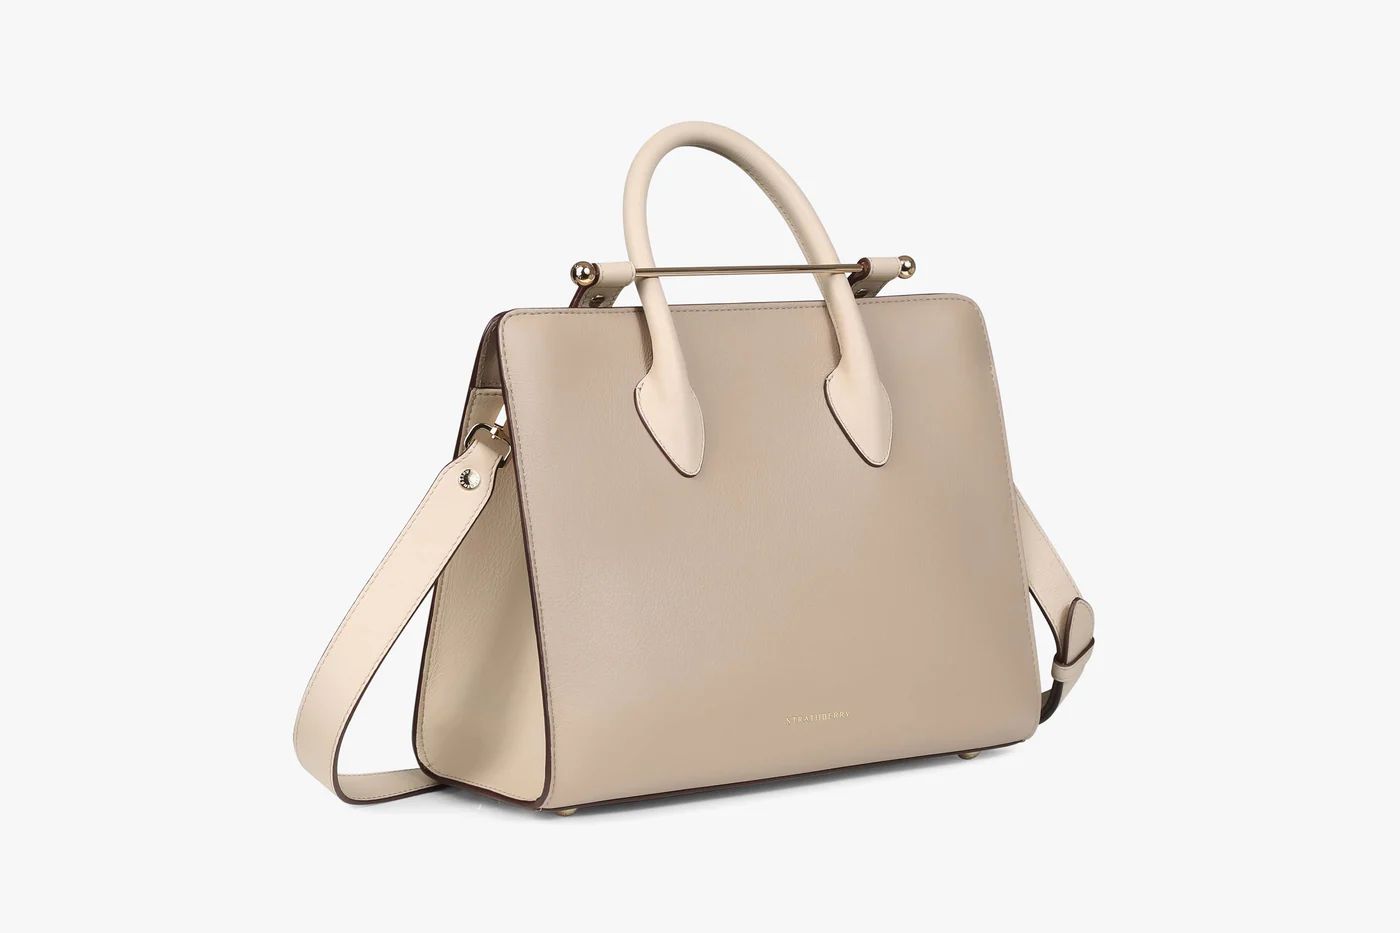 The Strathberry Midi Tote | Strathberry